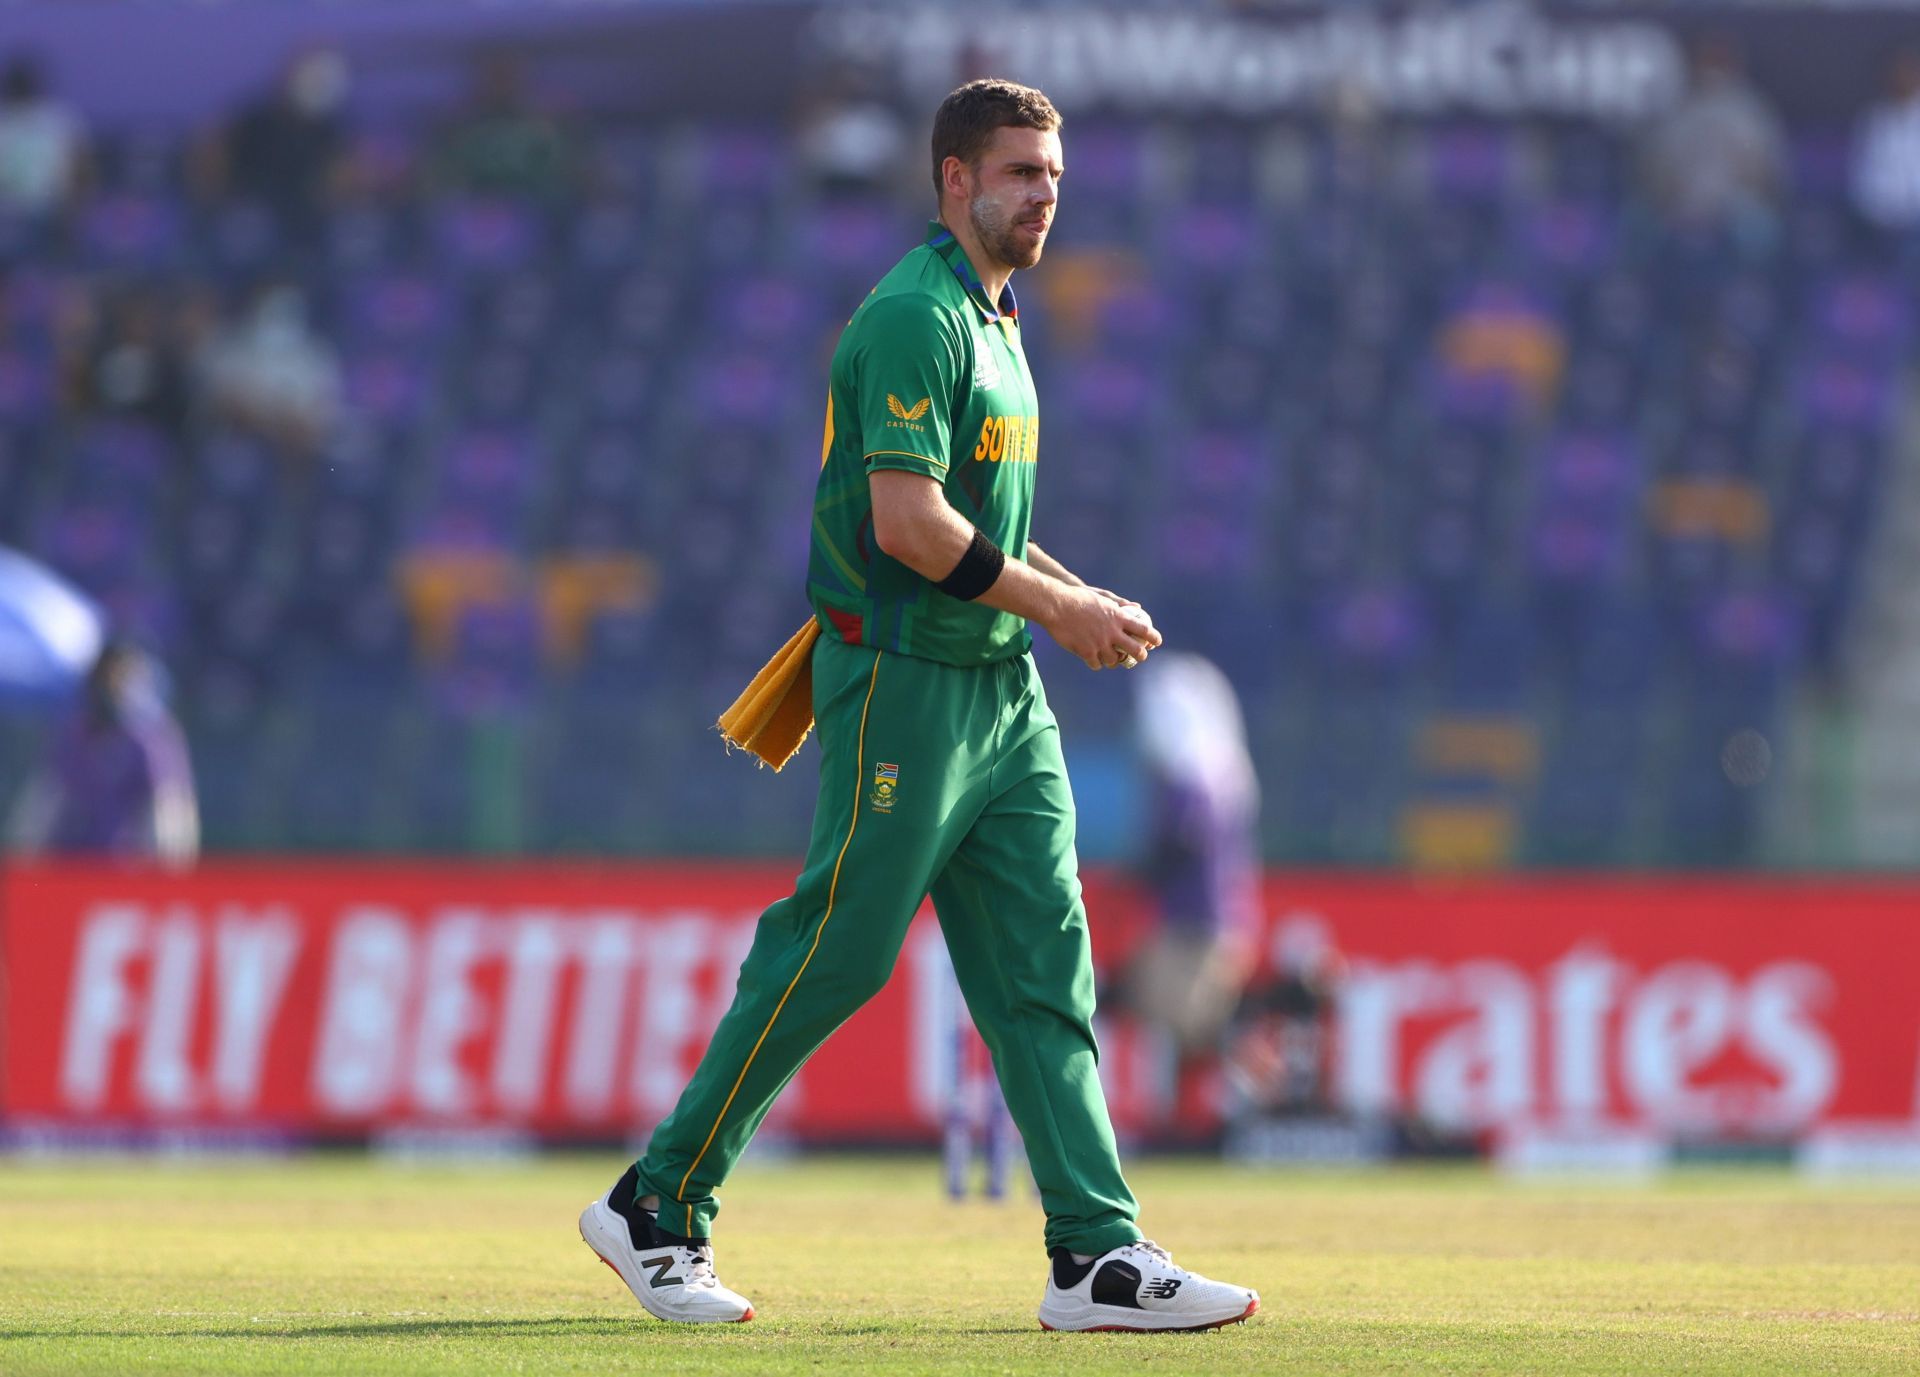 Anrich Nortje stole the show in the ICC T20 World Cup 2021